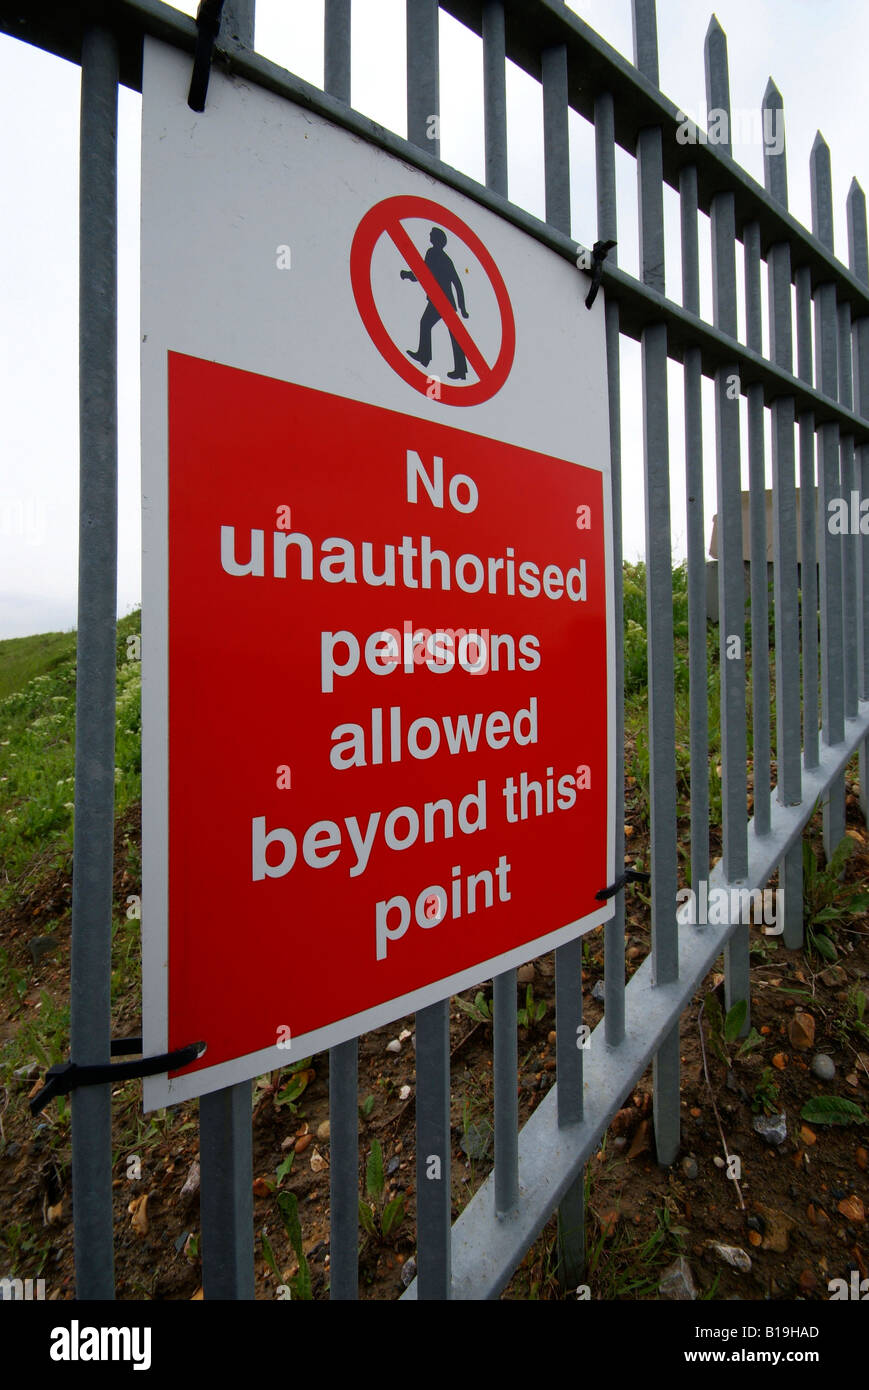 No unauthorised person allowed beyond this point. Stock Photo